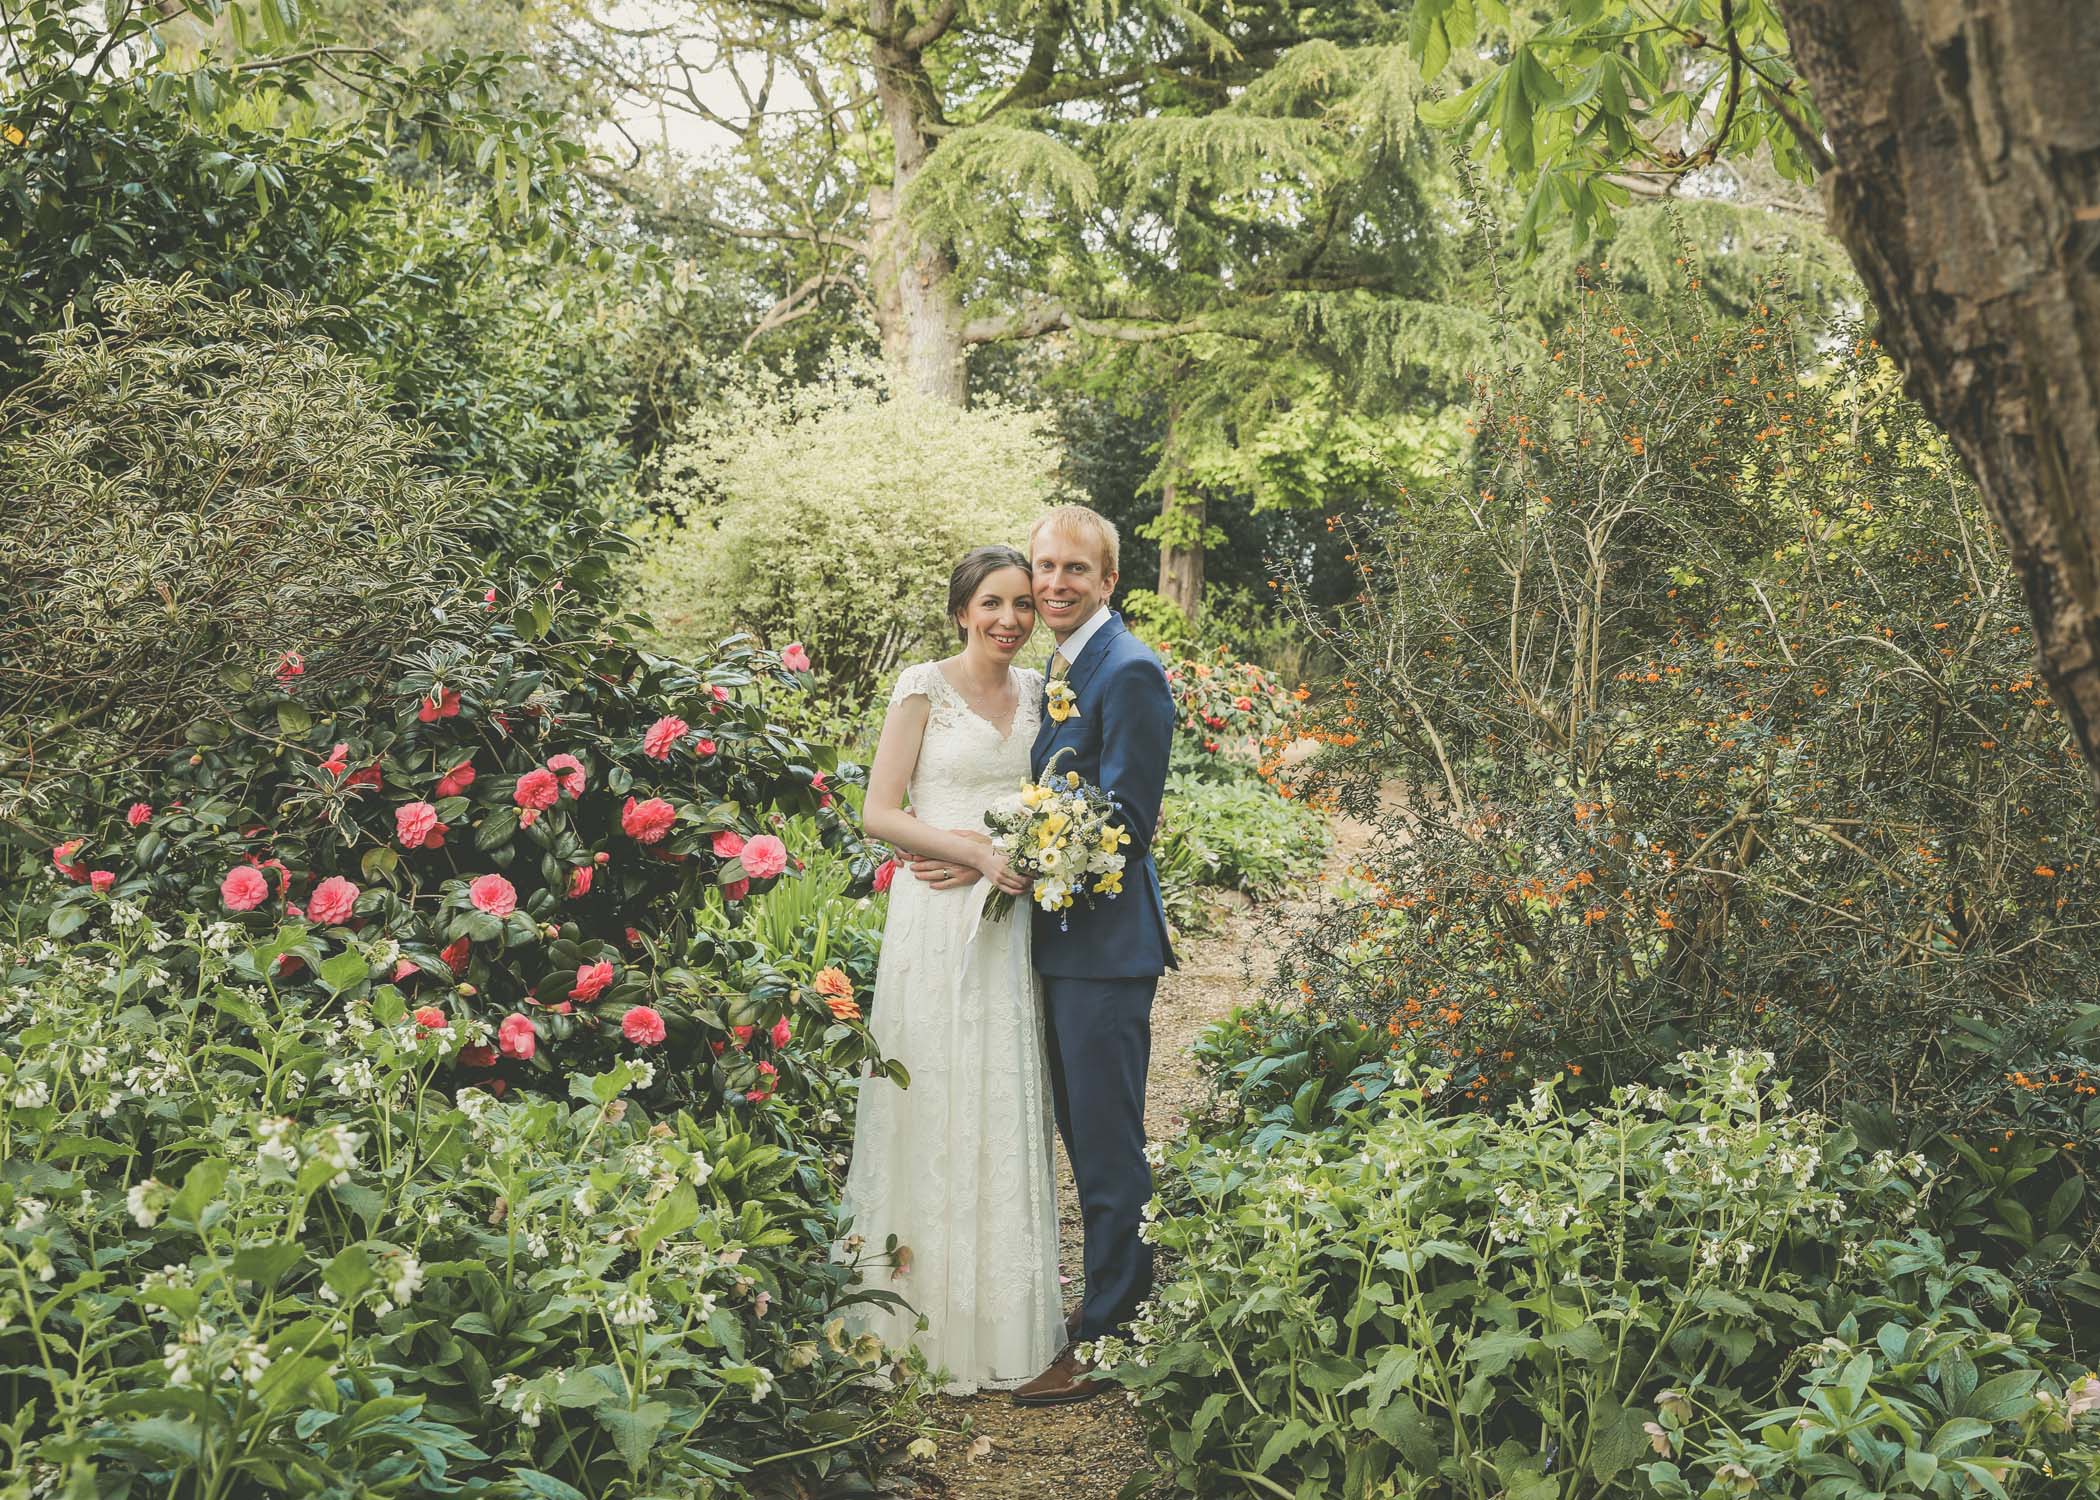 A bride and groom in the copse in spring flower on their wedding day at Haughley Park Barn Wedding Venue in Suffolk photographed by Suffolk Wedding Photographers Hayley Denston Photography